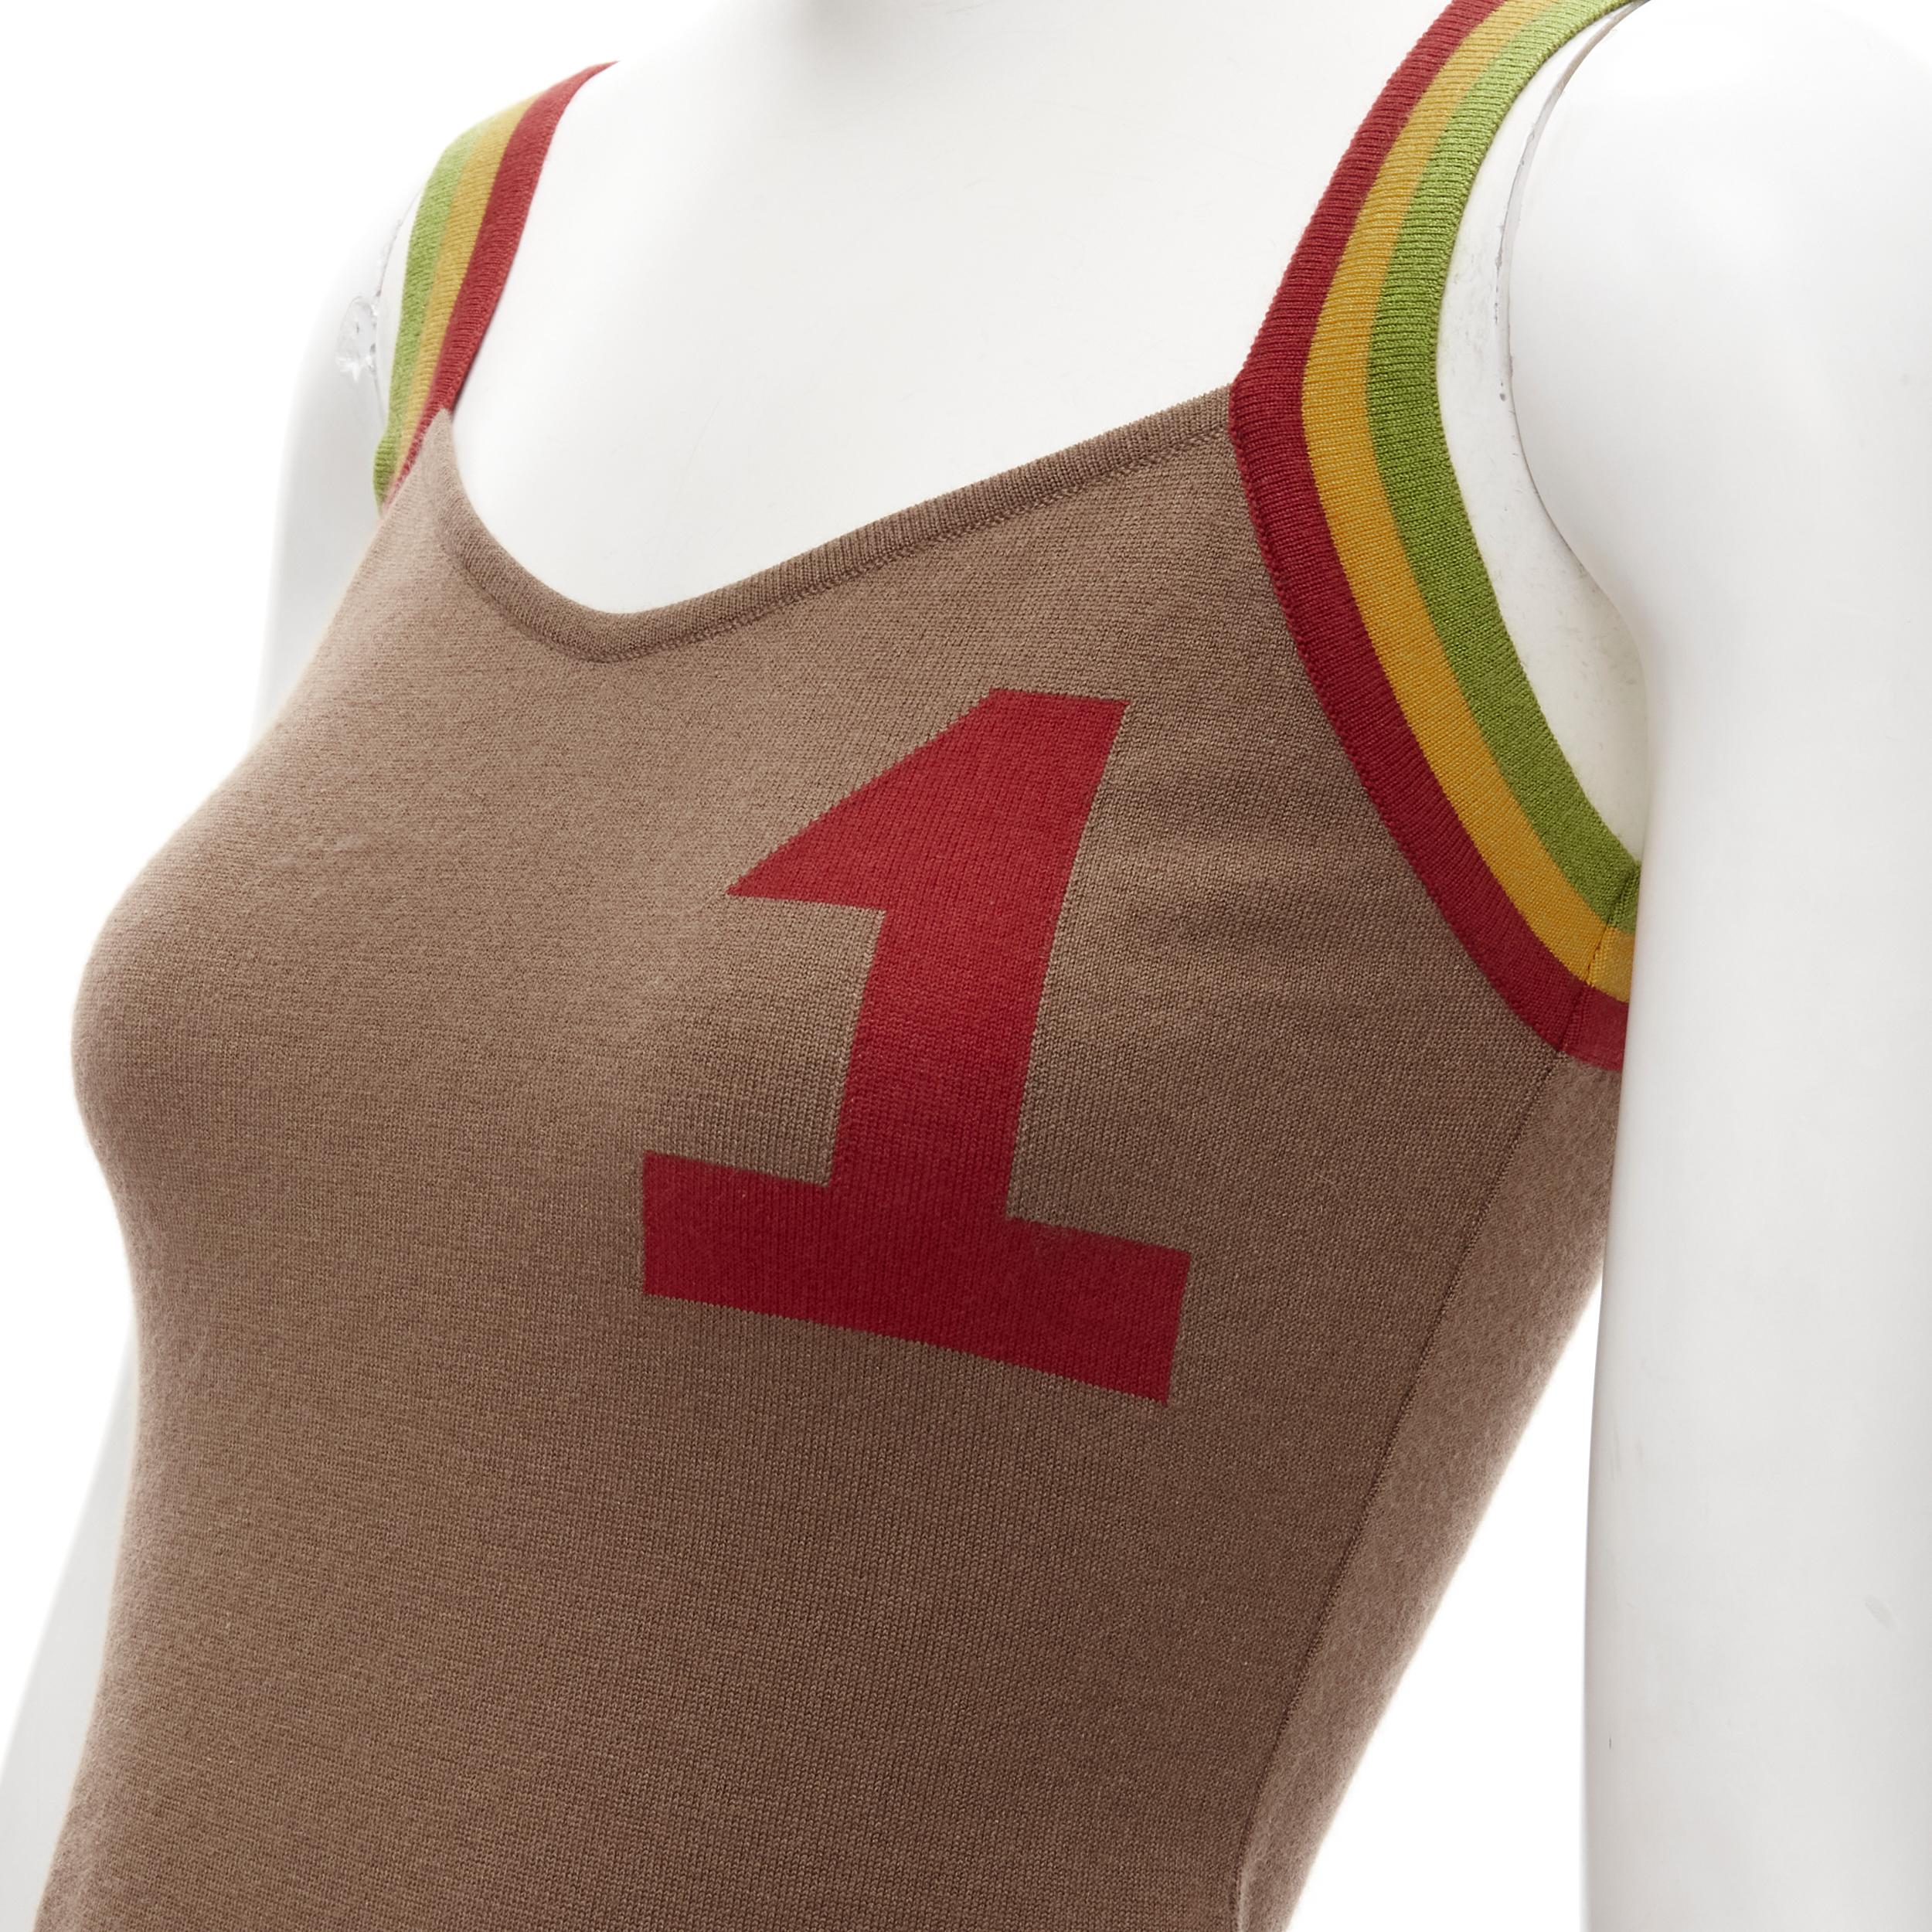 CHRISTIAN DIOR Vintage Y2K Rasta rainbow strap 1 metal charm tank top S
Reference: ANWU/A00612
Brand: Christian Dior
Designer: John Galliano
Collection: Rasta
Material: Feels like cotton
Color: Brown
Pattern: Solid
Extra Detail: V-Neck. Silver-tone